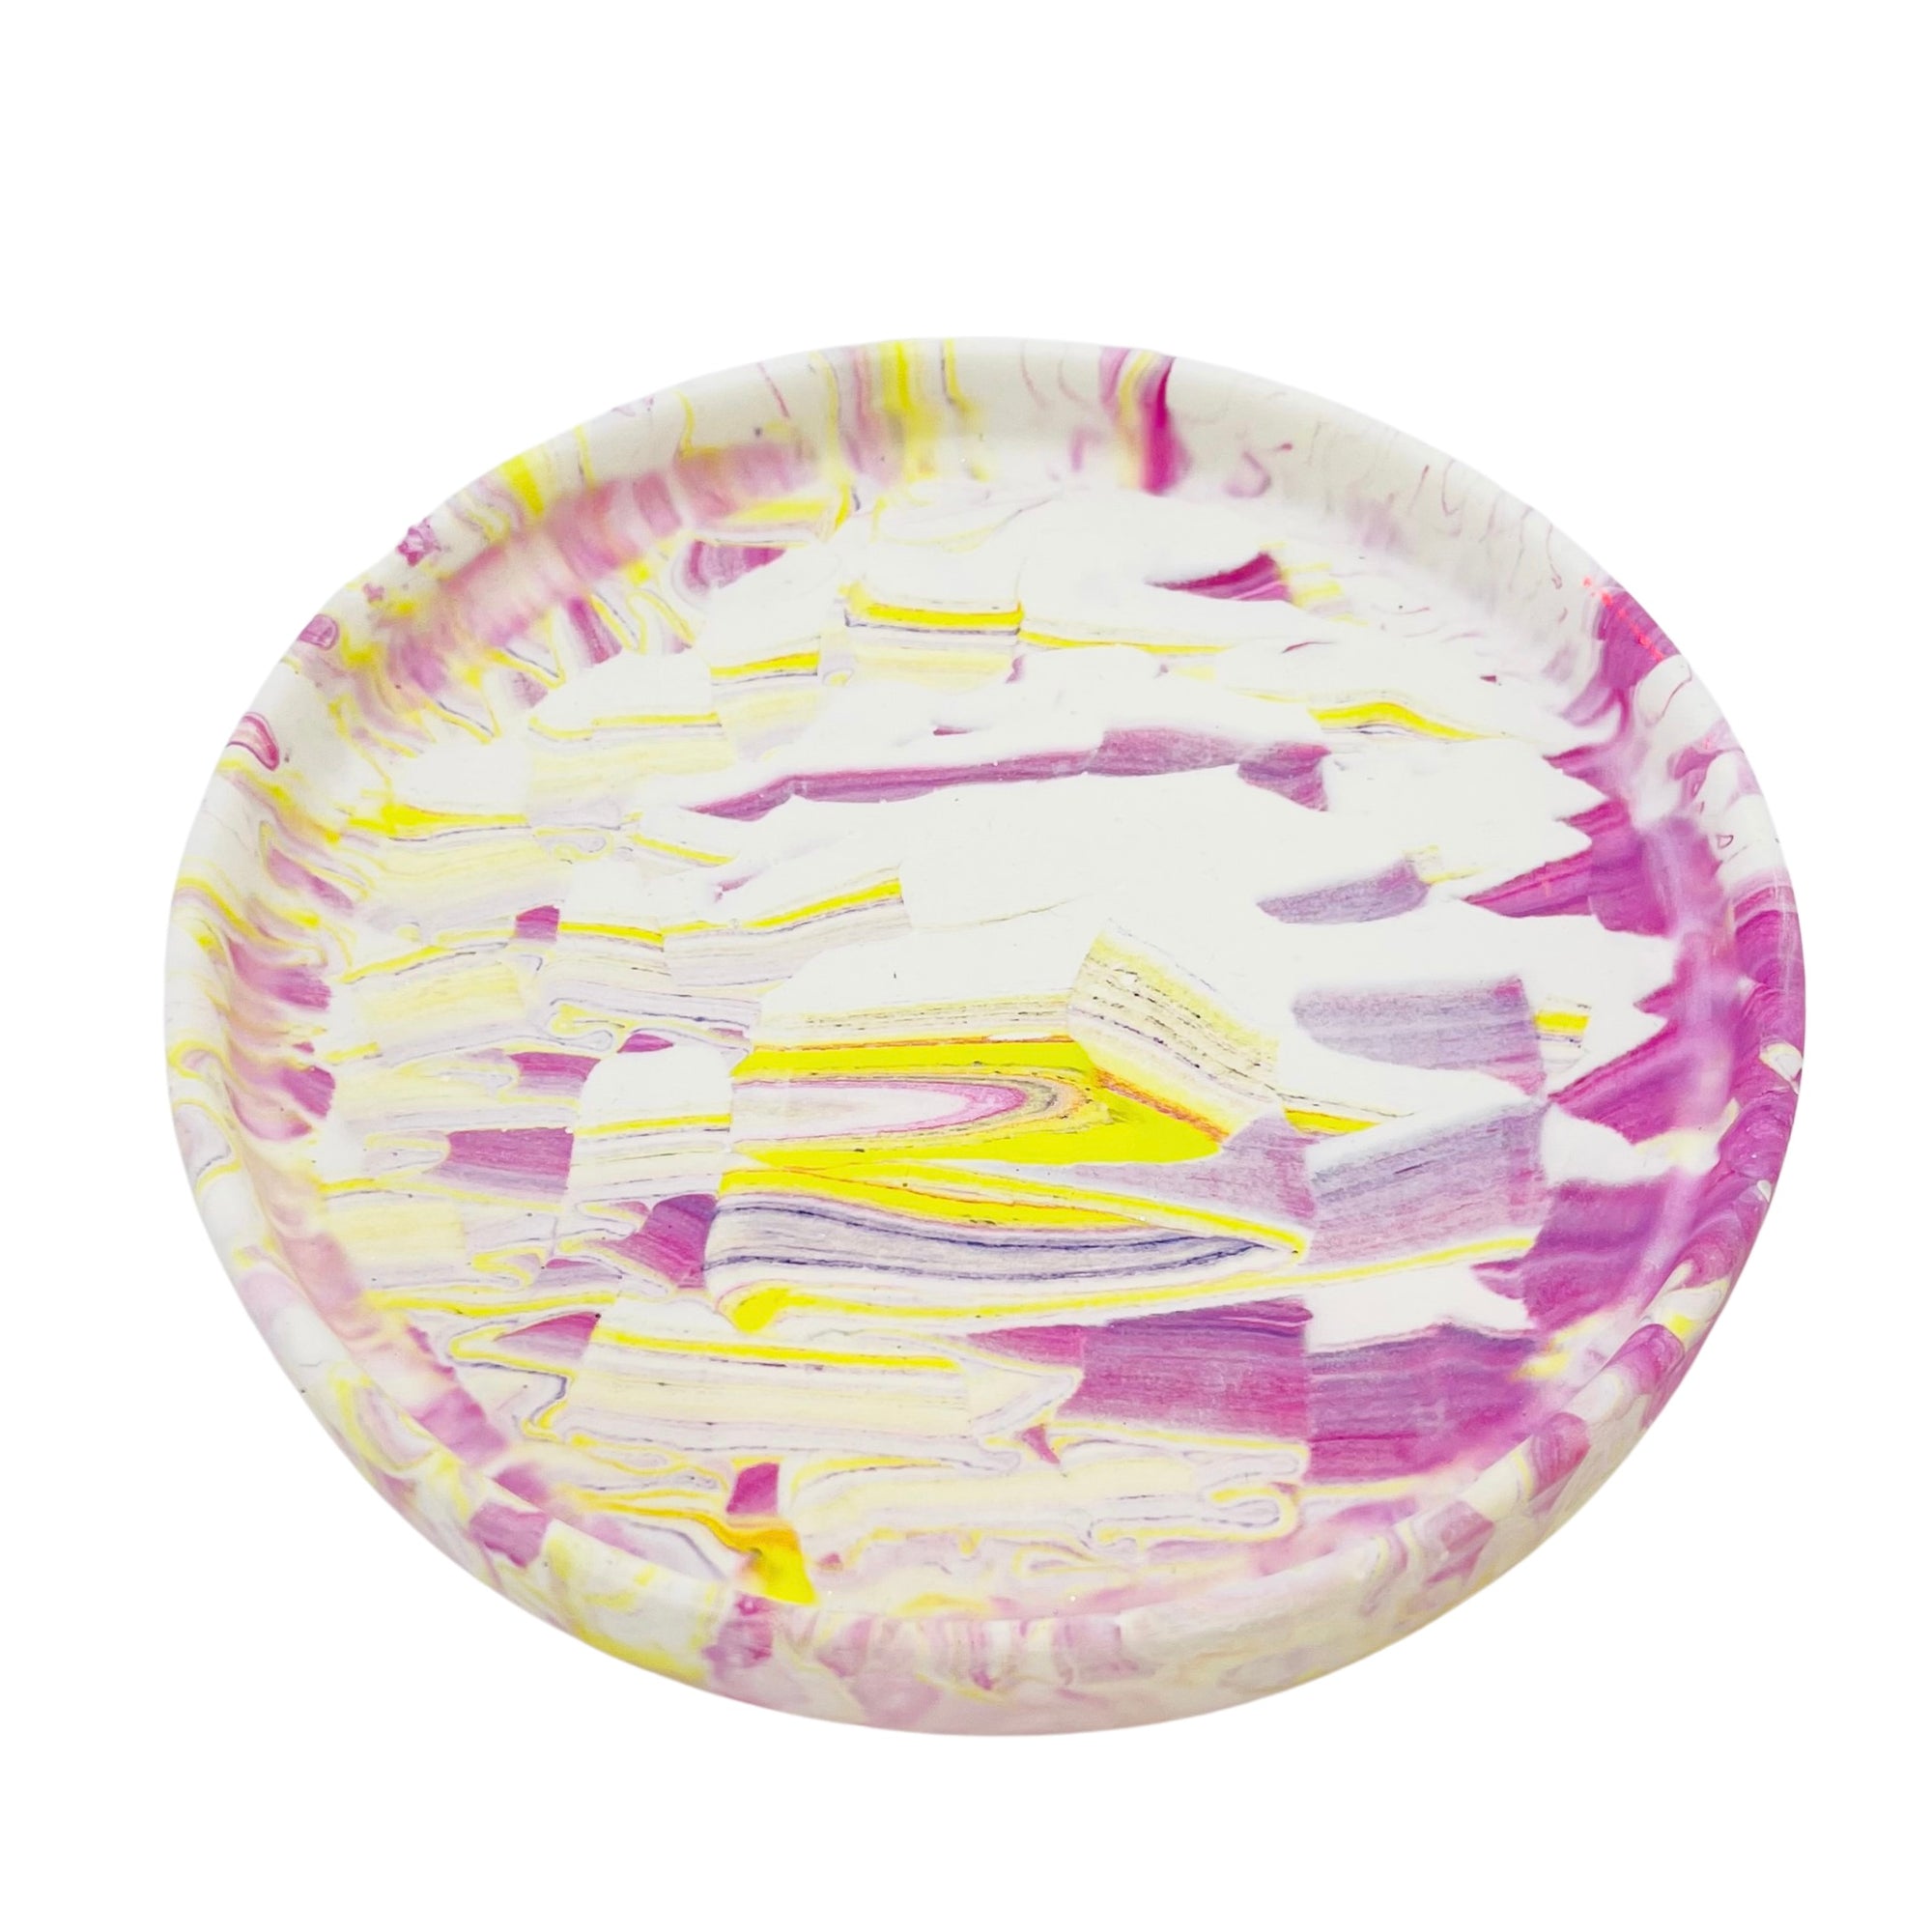 A circular Jesmonite trinket tray measuring 15.4cm in diameter marbled with magenta and yellow pigment.